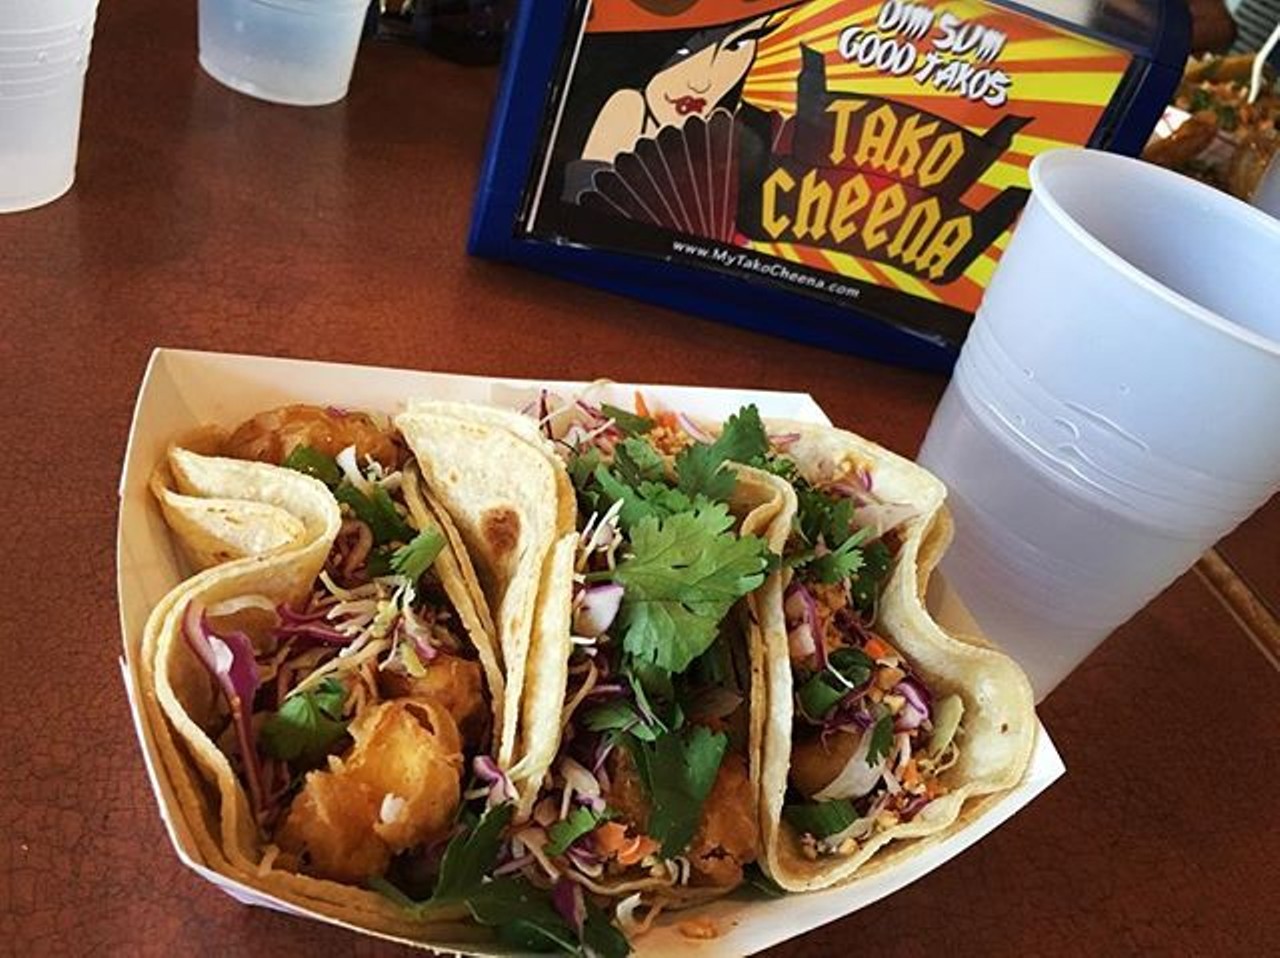 Tako Cheena 
932 N. Mills Ave., (321) 236-7457
Tacos and asian hot dogs are what Tako Cheena does best. The tiny taco place also serves spanish, asian and indian style burritos too. Don&#146;t forget to add one of their speciality sauces and salsas for even more flavor.
Photo via jeffus3/Instagram